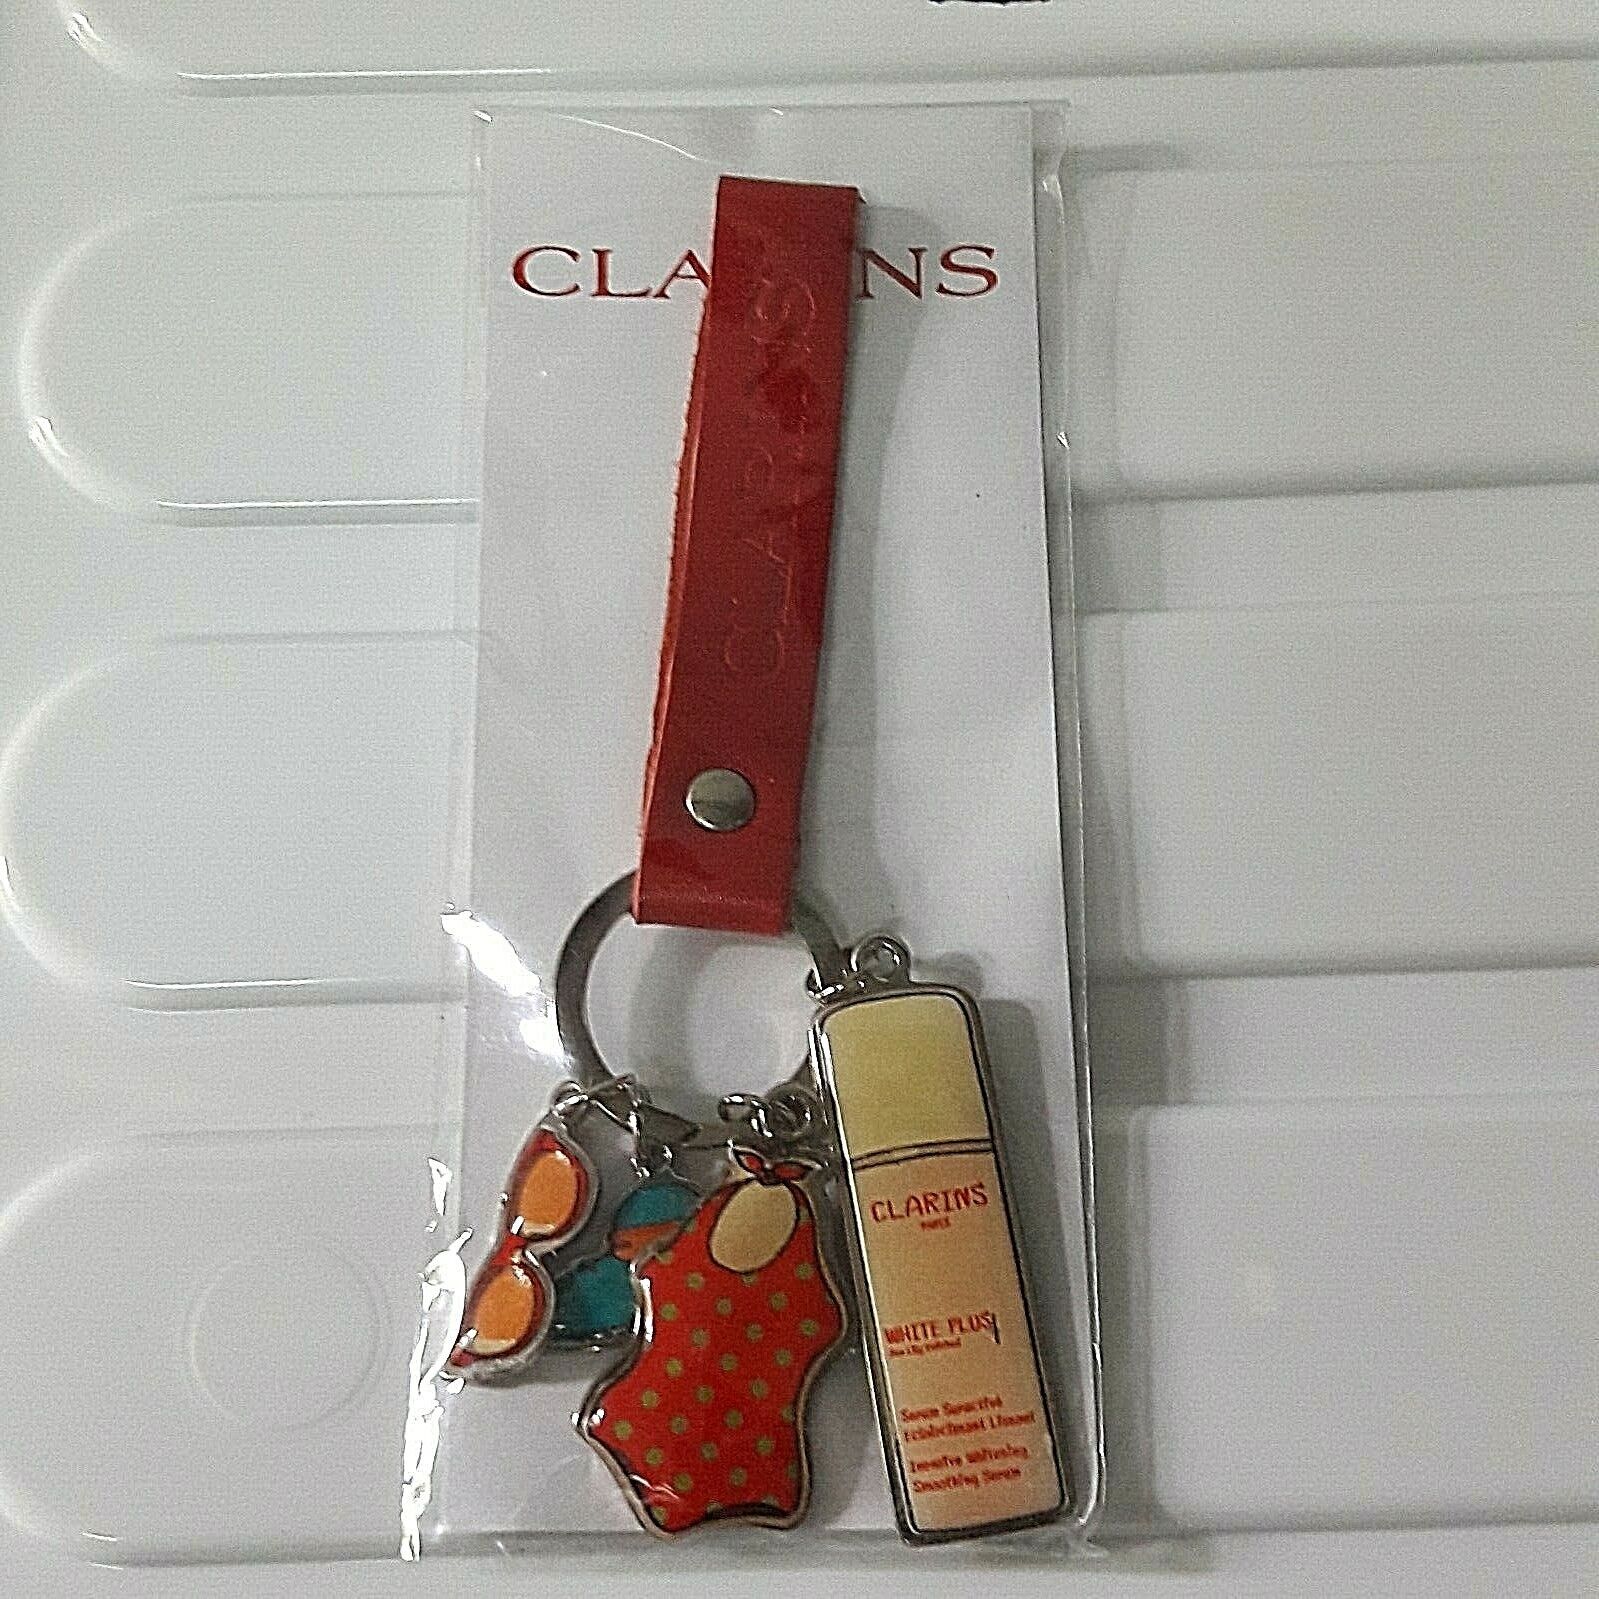 Clarins Paris Keyring Keychain Red Leather Holder Promo Advertising New with Tag